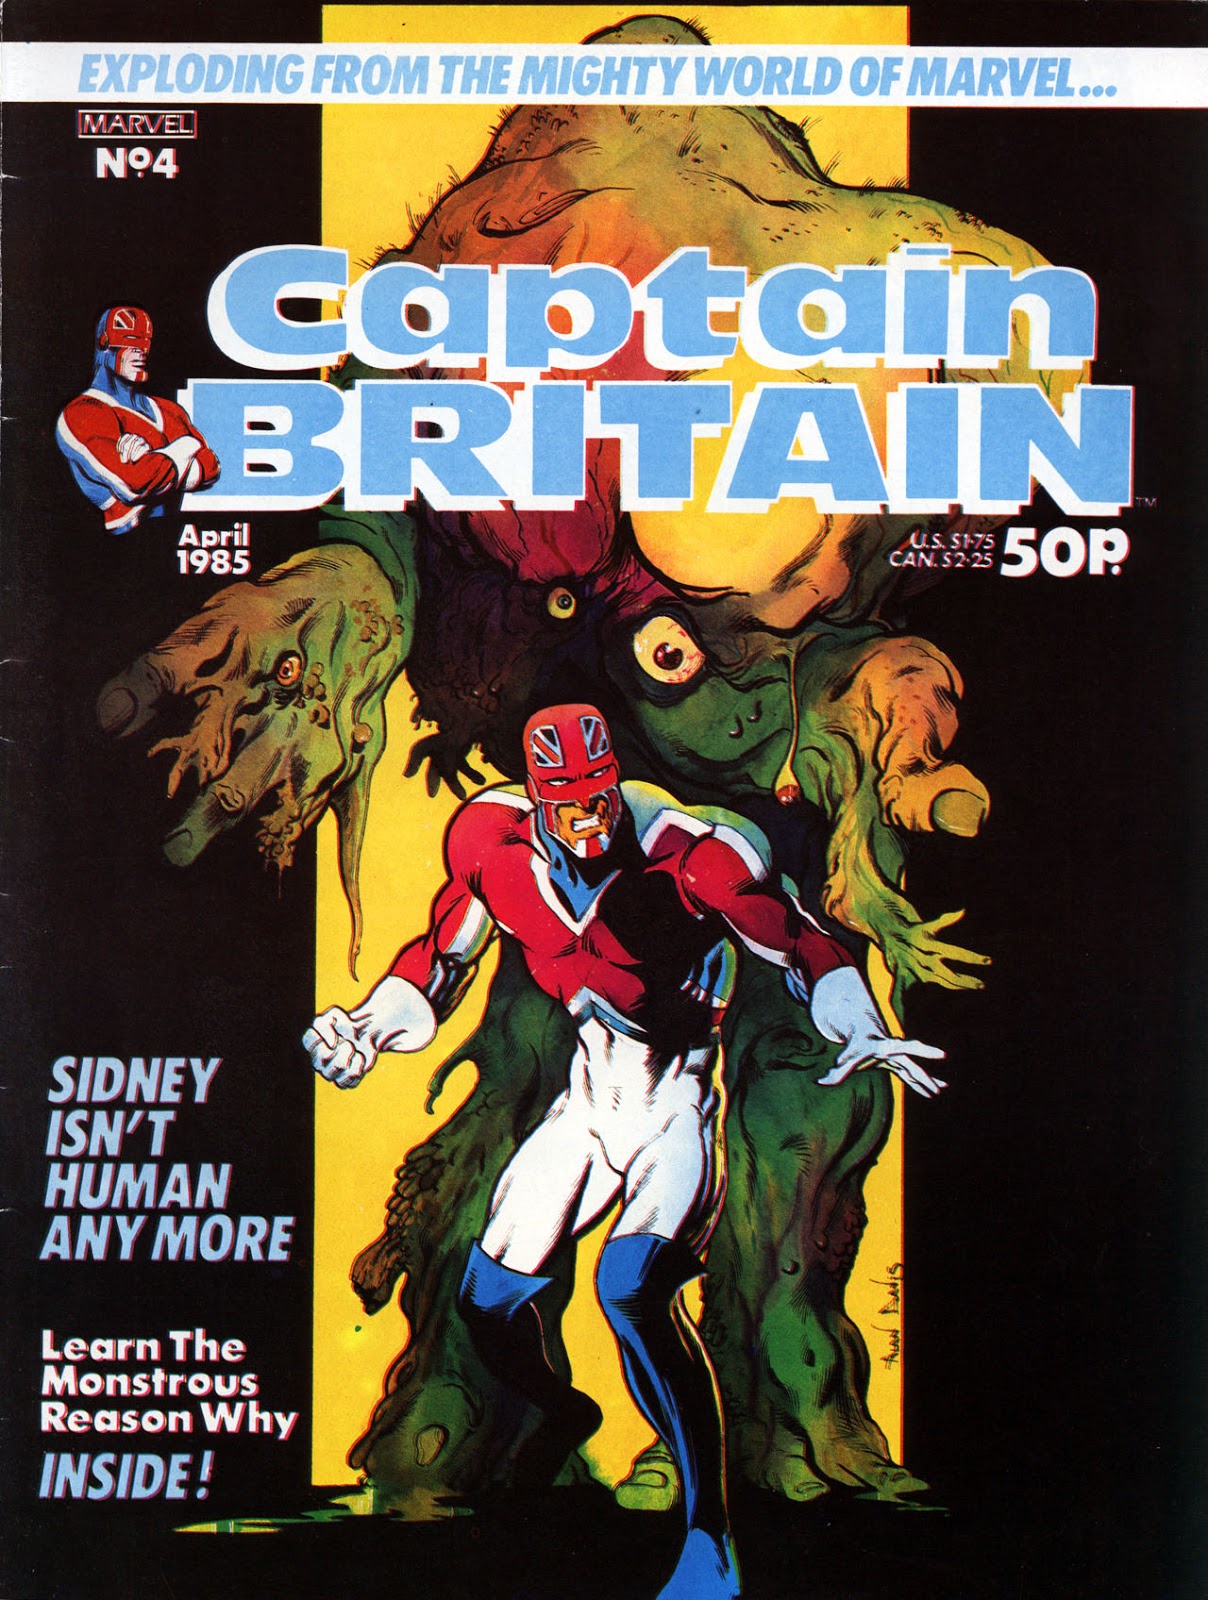 Rumor: Henry Cavill Front Runner To Play Marvel Cinematic Universe's  Captain Britain - Bounding Into Comics